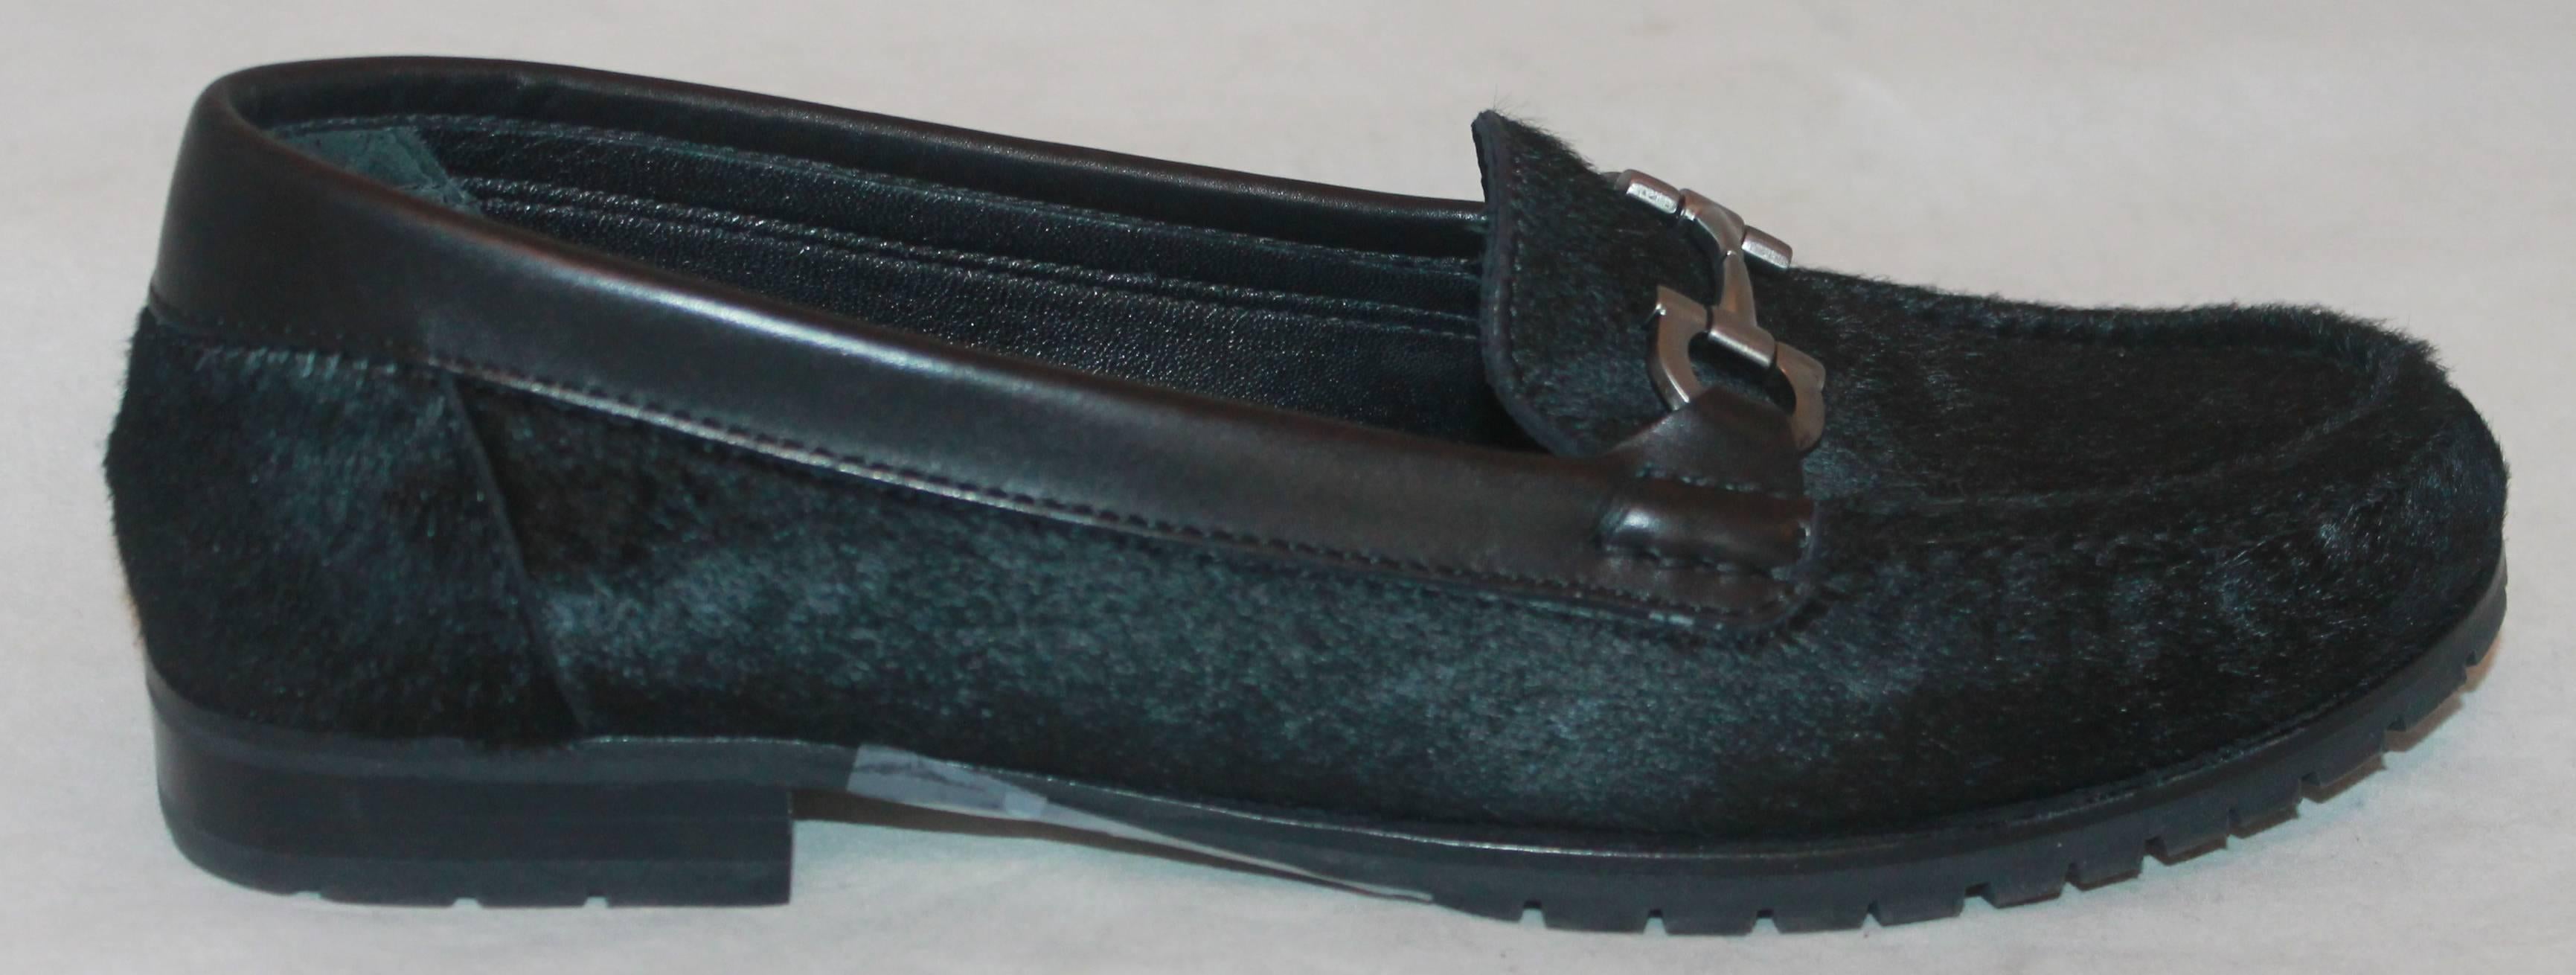 Salvatore Ferragamo Black Pony Hair Loafers w/ Silver Front Buckle - 7AA.  These shoes have minor wear at the bottom of the soul and a small piece of the rubber underneath that is missing.  Other than that they are in very good condition. They